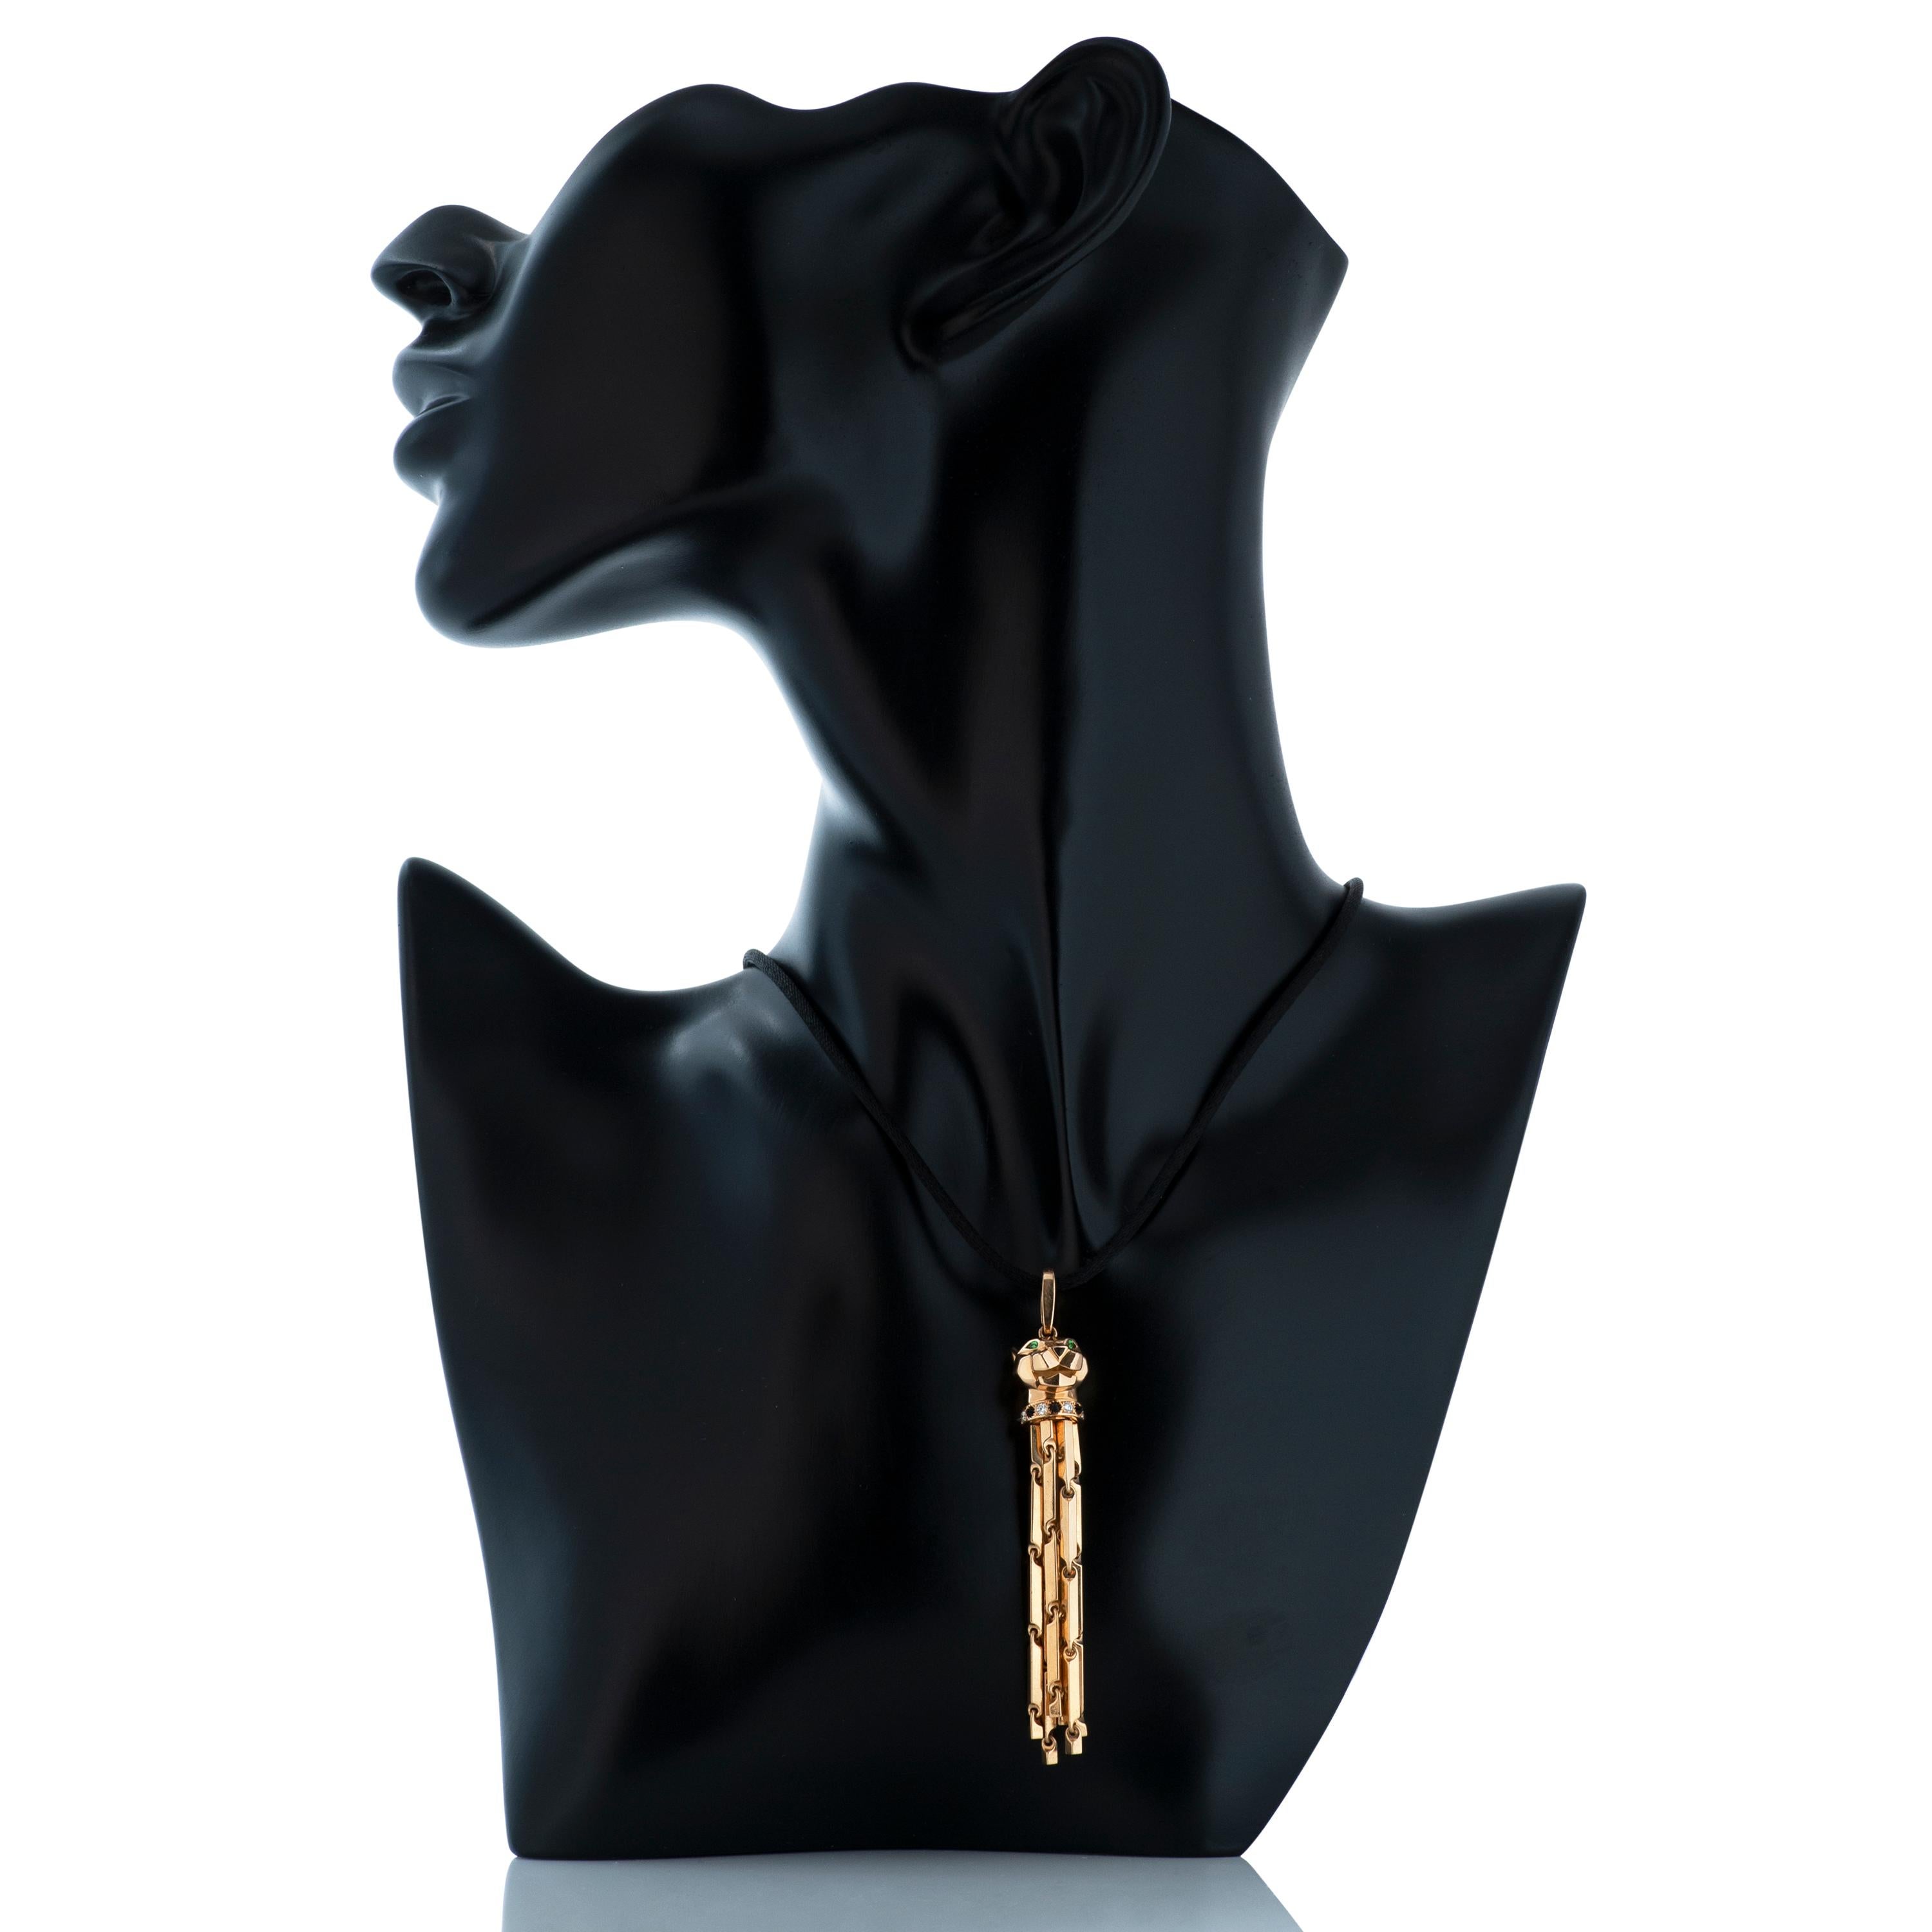 Cartier 18k yellow gold diamond, tsavorite and onyx Panthere pendant on adjustable black cord necklace with 18k yellow gold clasp.  

This Cartier pendant features a panther head with gold hanging tassels.  The panther head contains 7 round diamonds